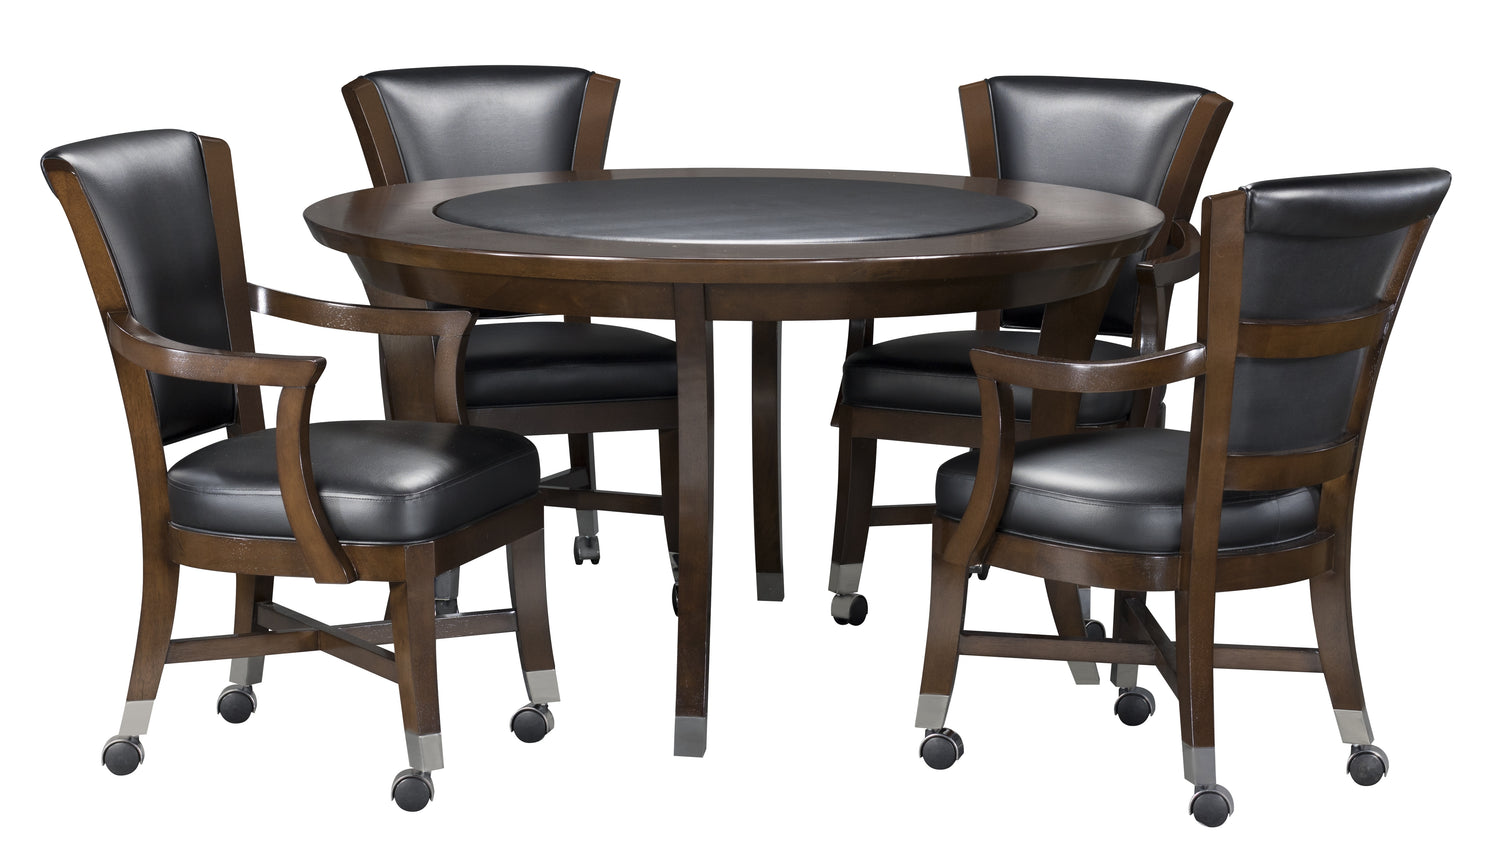 Legacy Billiards Elite Caster Game Chairs with Signature Flip Top Game Table